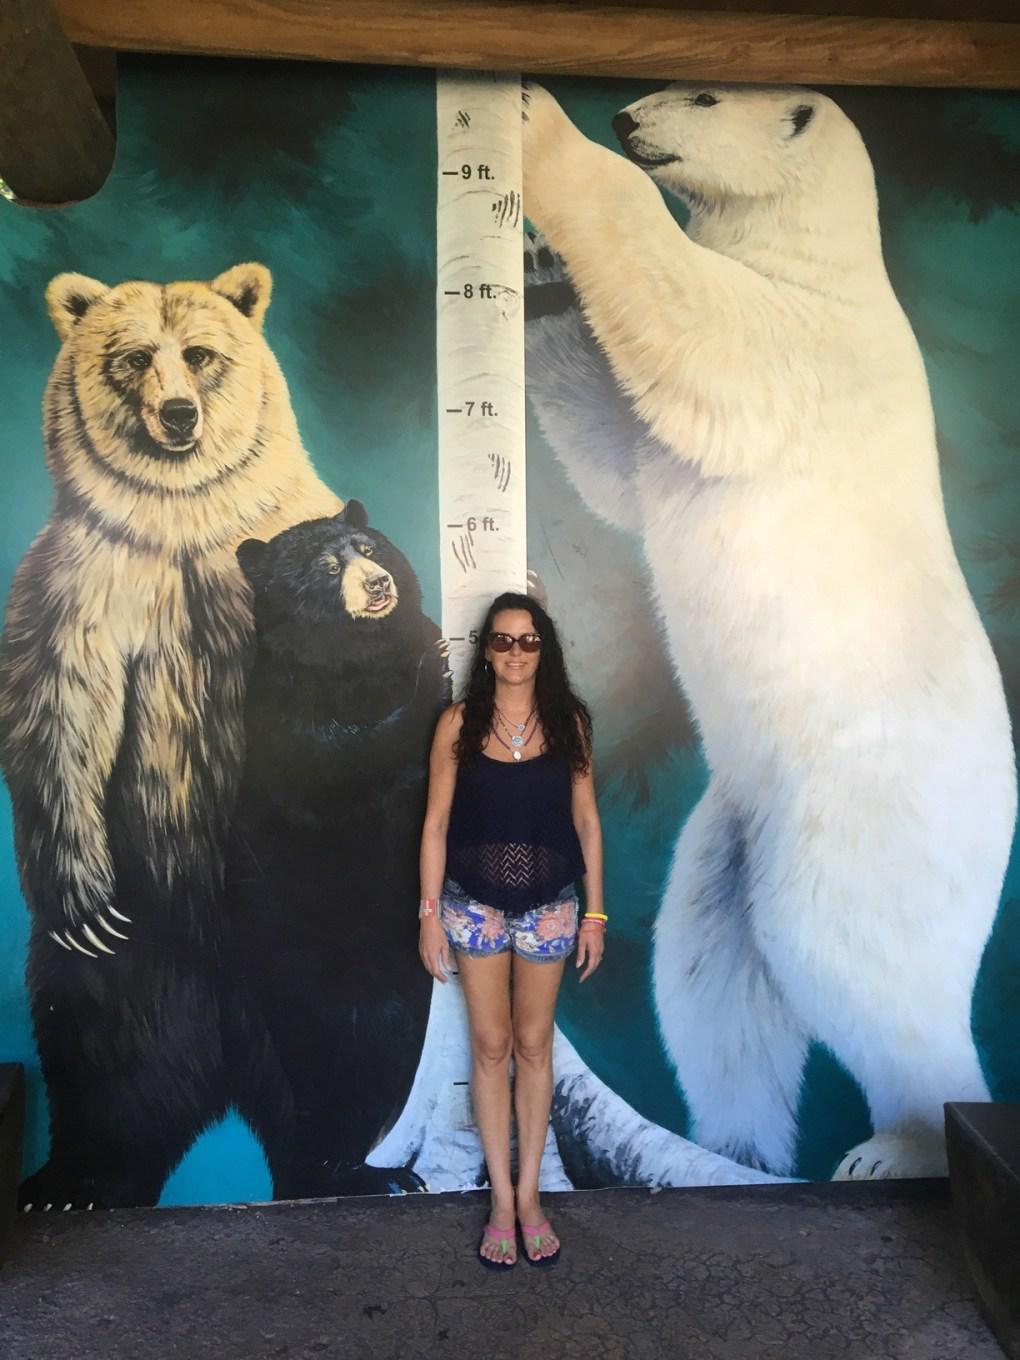 Bears for scale.